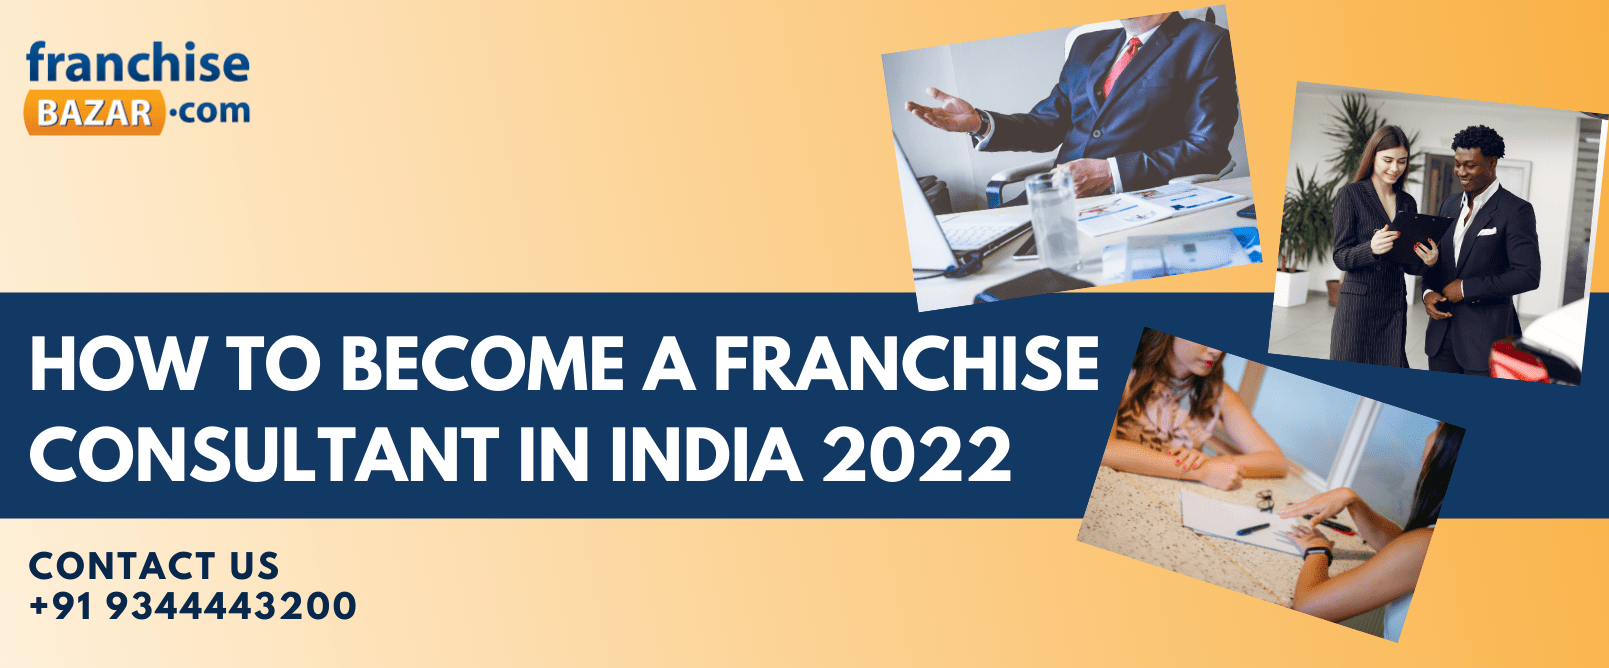 How To Become A Franchise Consultant In India 2022.	